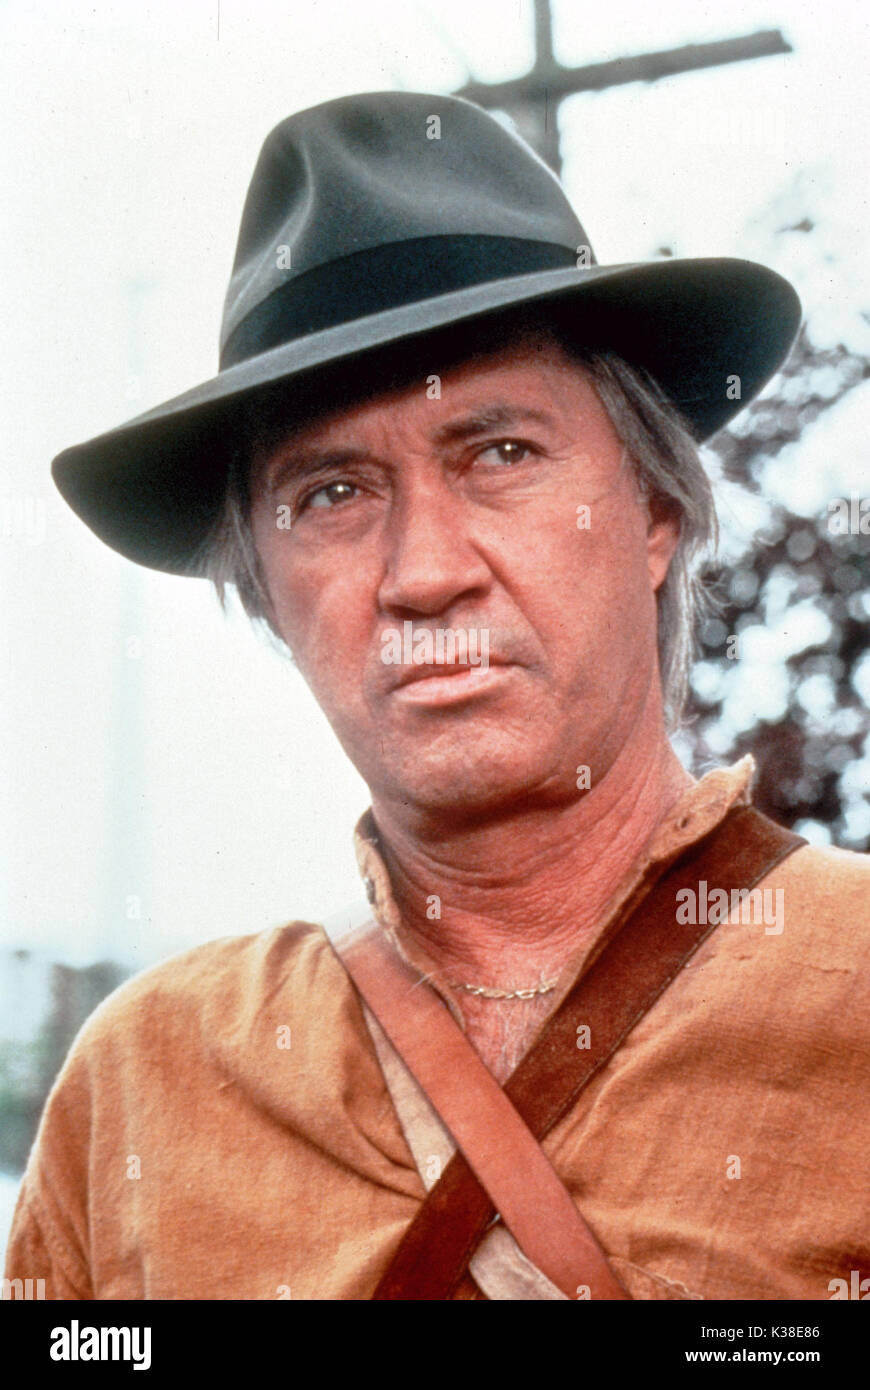 KUNG FU:THE LEGEND CONTINUES DAVID CARRADINE, as Kwai Chang Caine RELEASE BY WARNER BROS. TELEVISION   KUNG FU:THE LEGEND CONTINUES DAVID CARRADINE, as Kwai Chang Caine Stock Photo